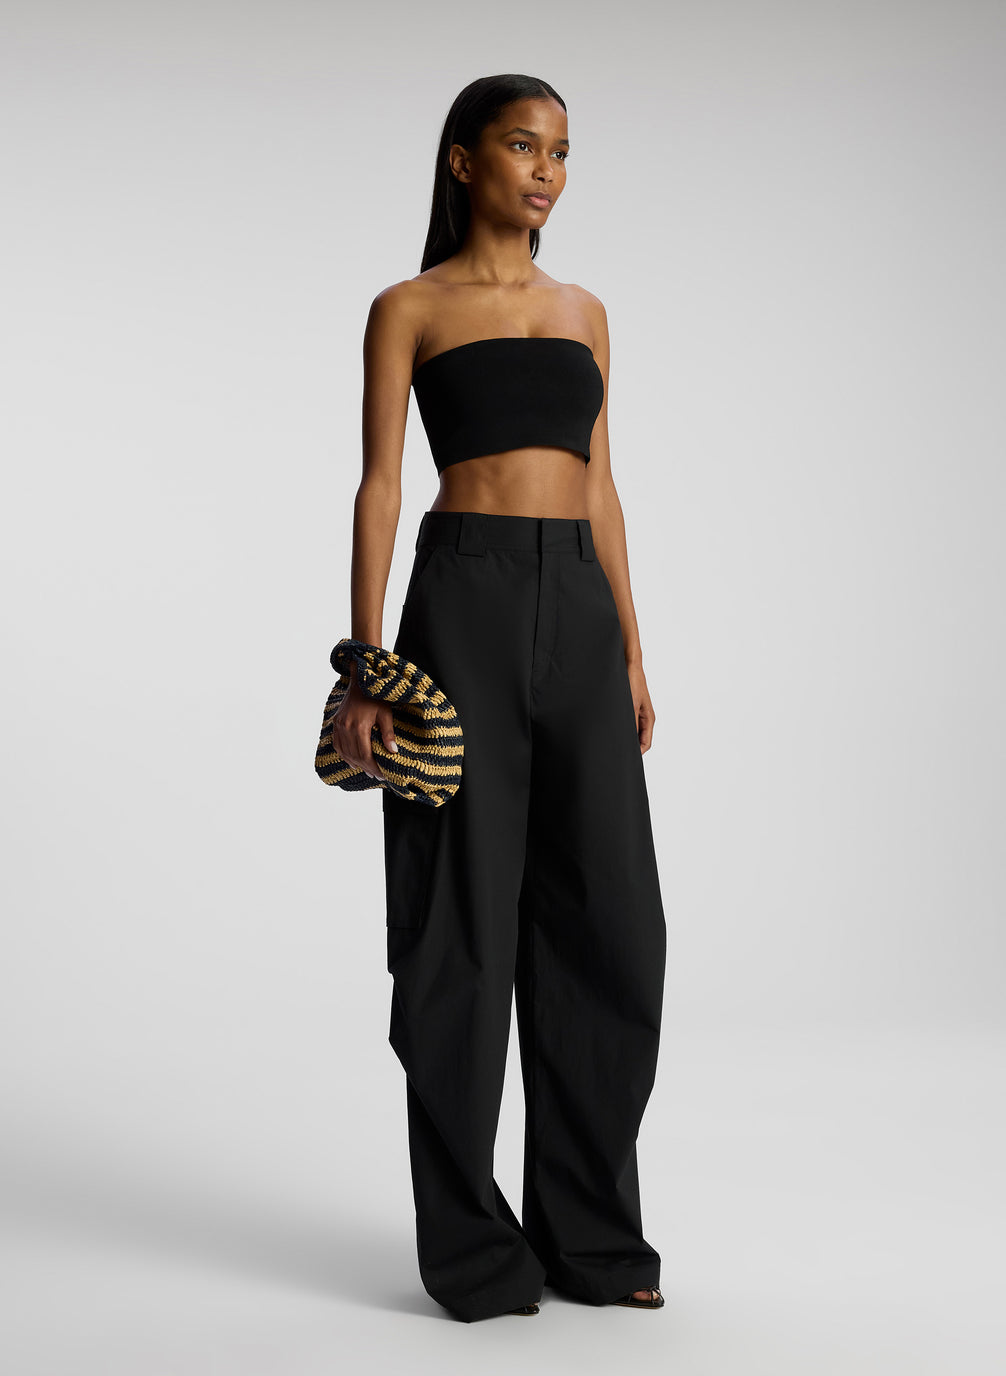 side view of woman wearing black strapless crop top and black pants